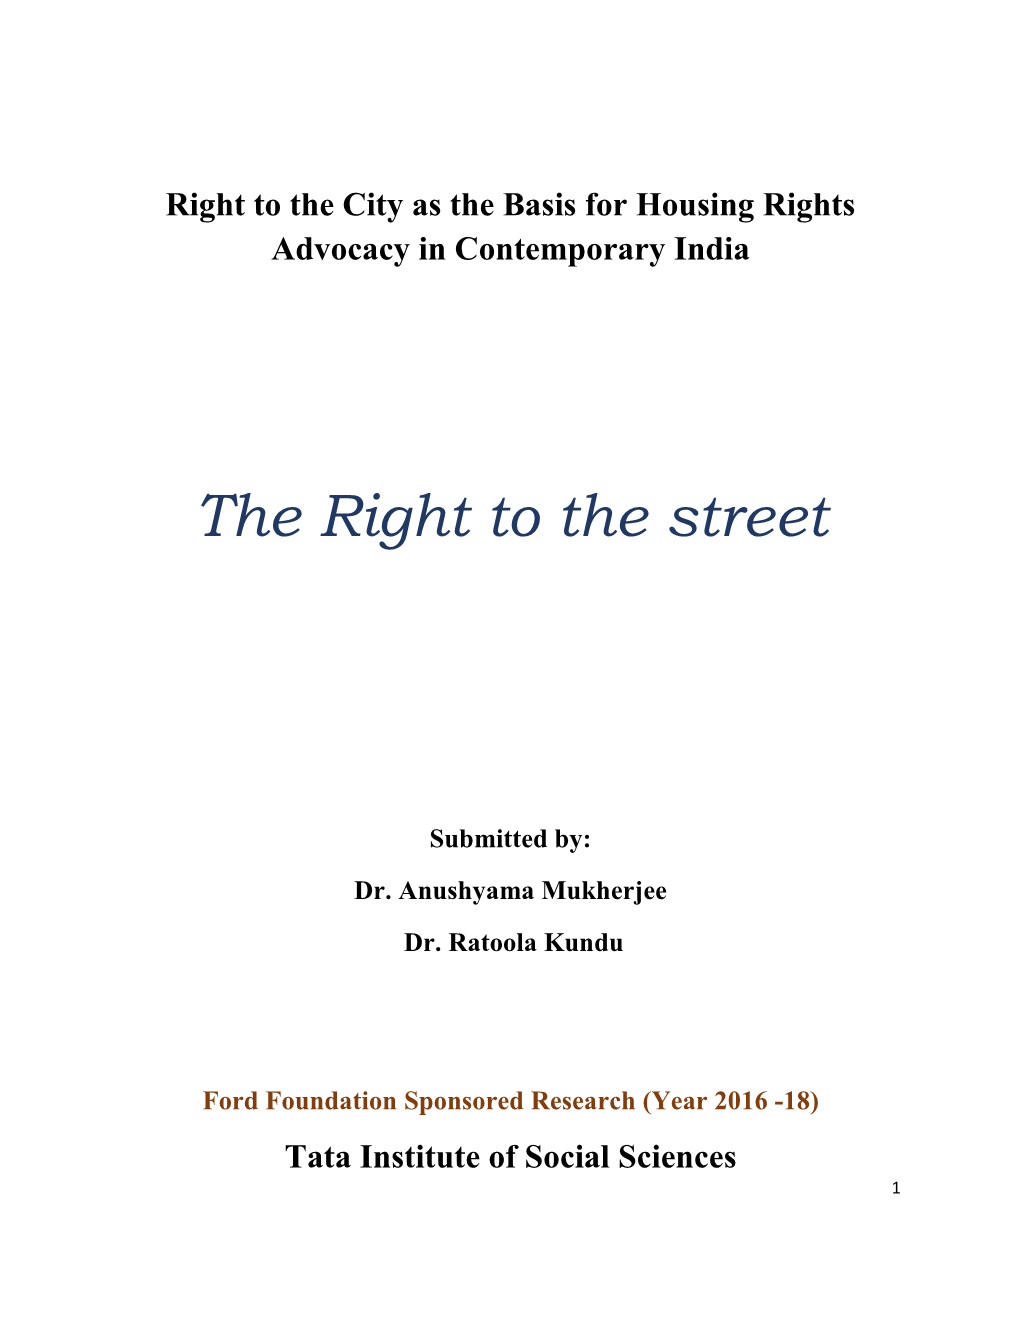 The Right to the Street